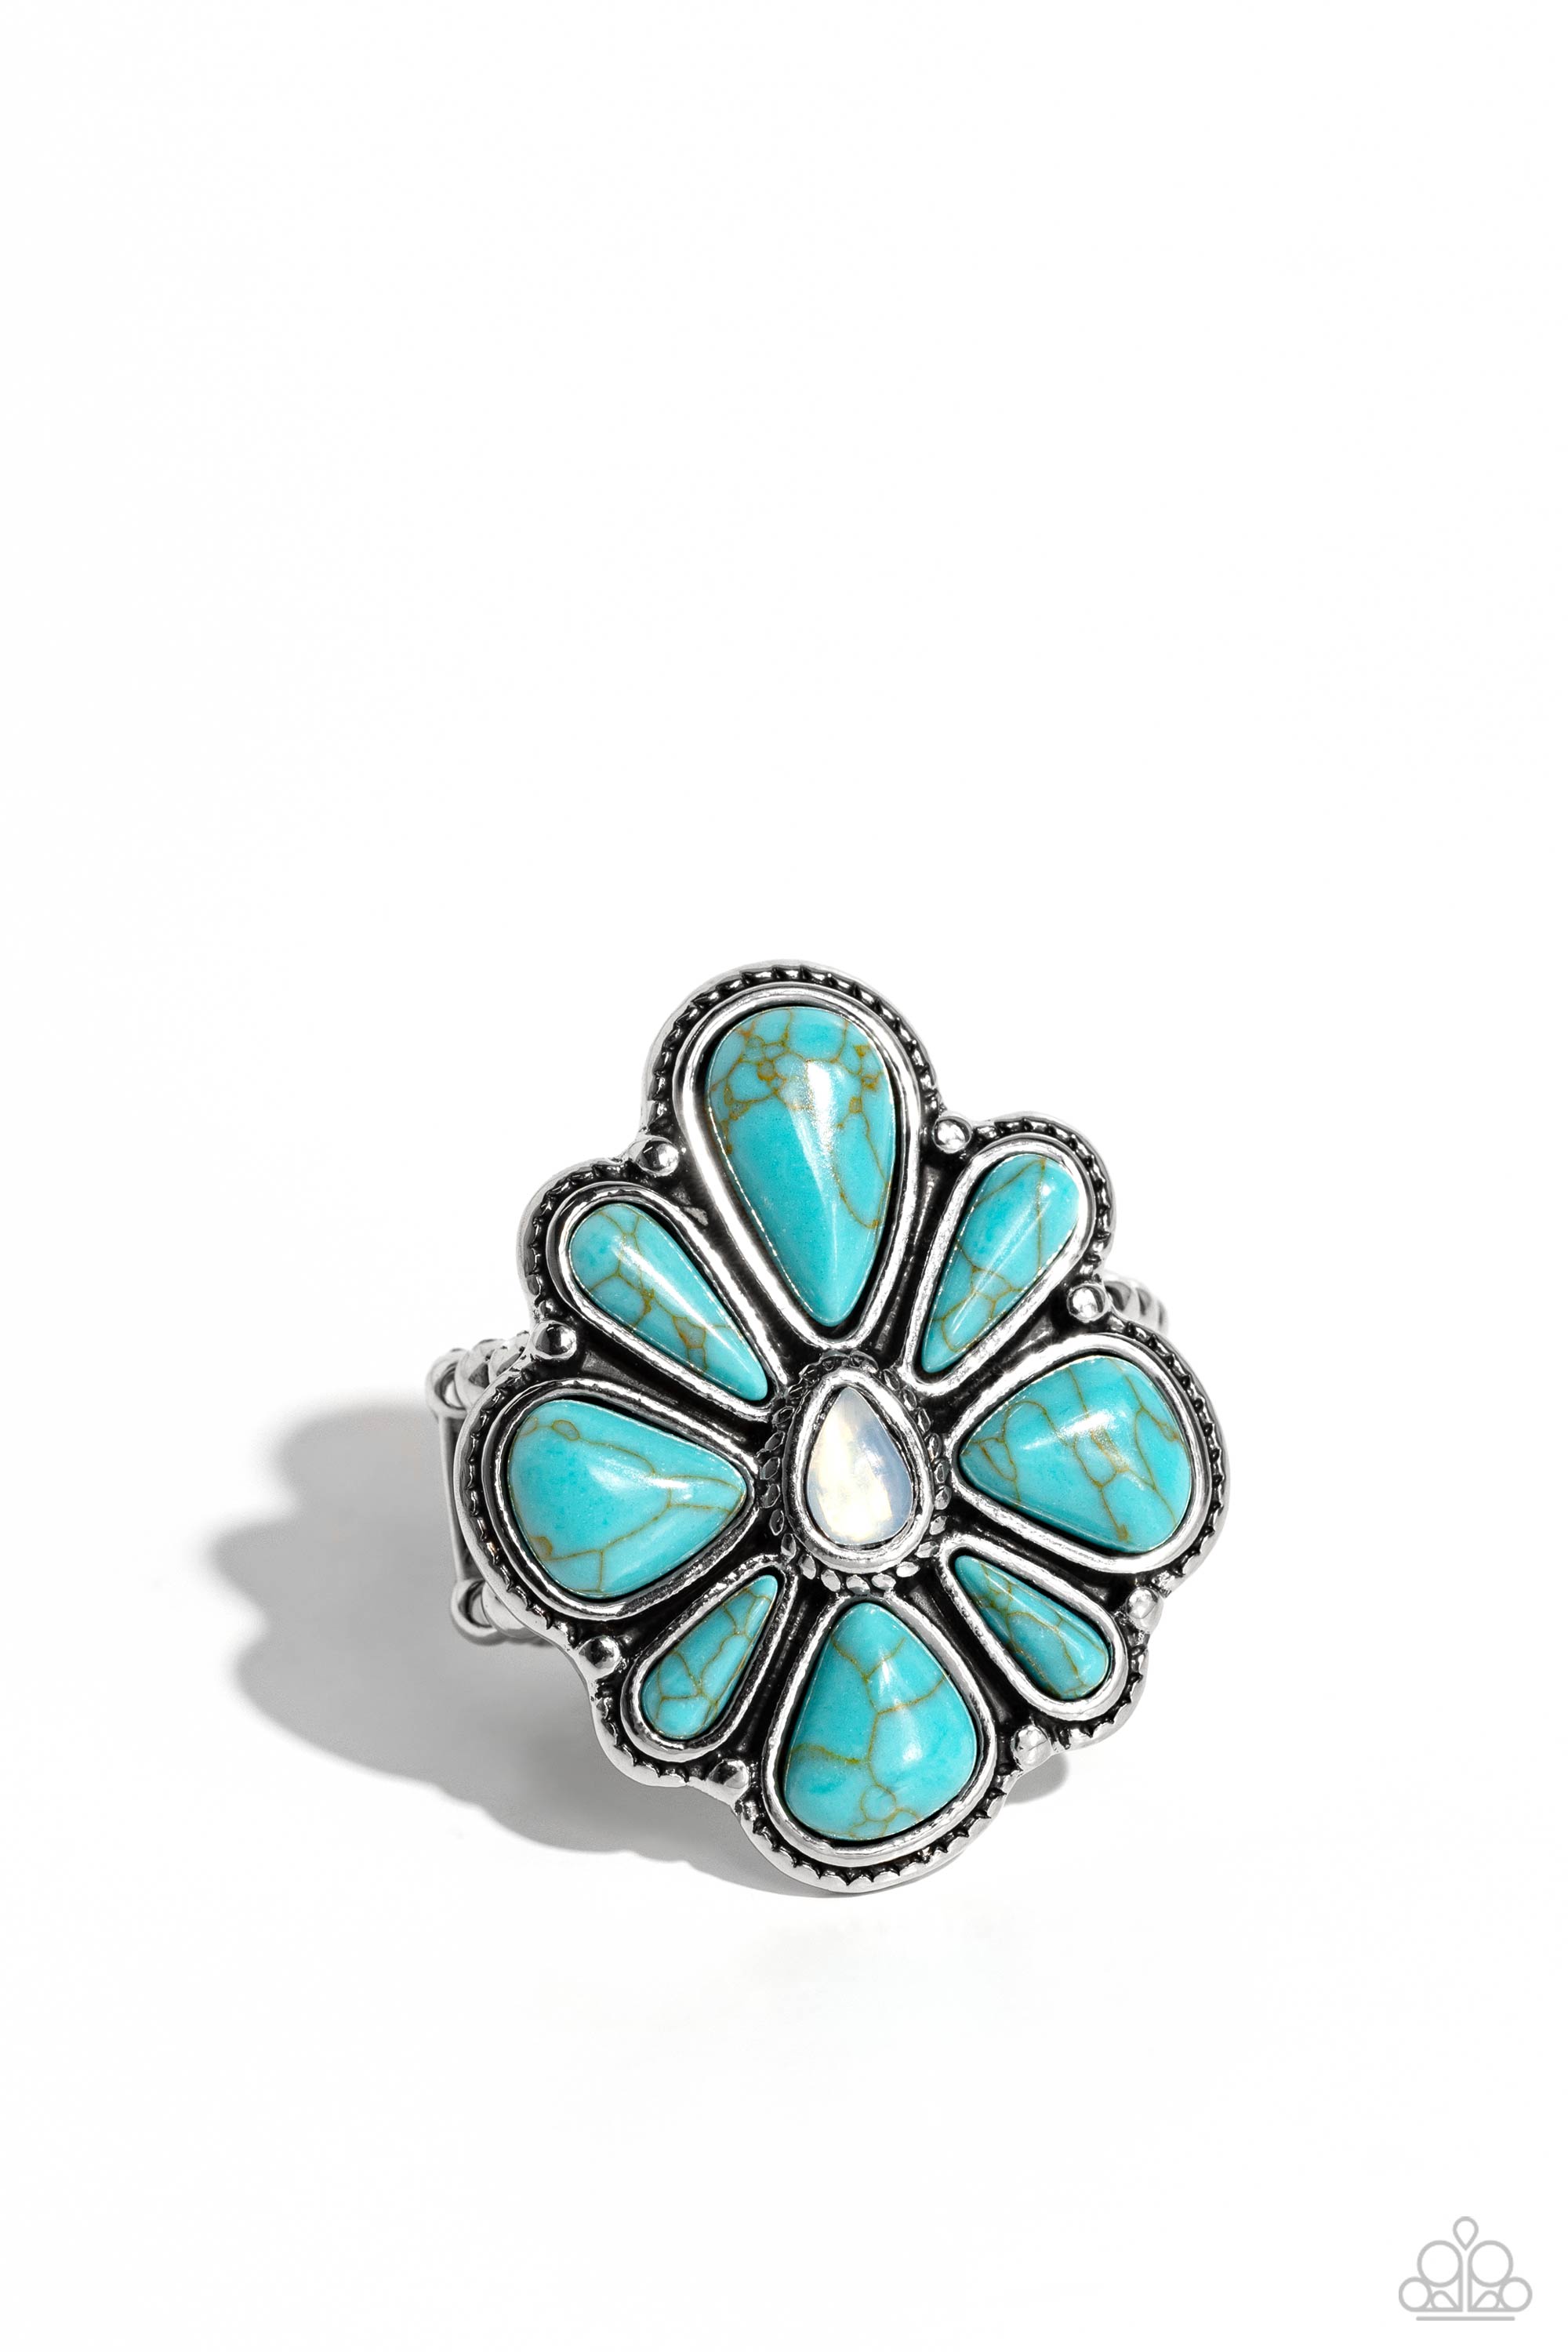 Floral Folklore Turquoise Blue Stone Flower Ring - Paparazzi Accessories- lightbox - CarasShop.com - $5 Jewelry by Cara Jewels